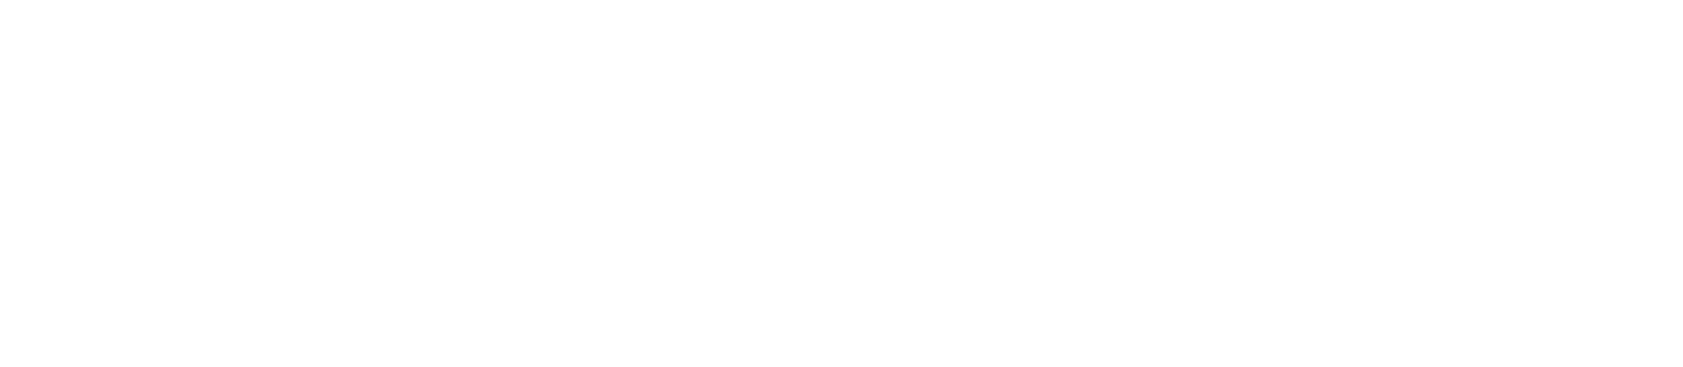 electric-paper-wahlsysteme-logo-weiss